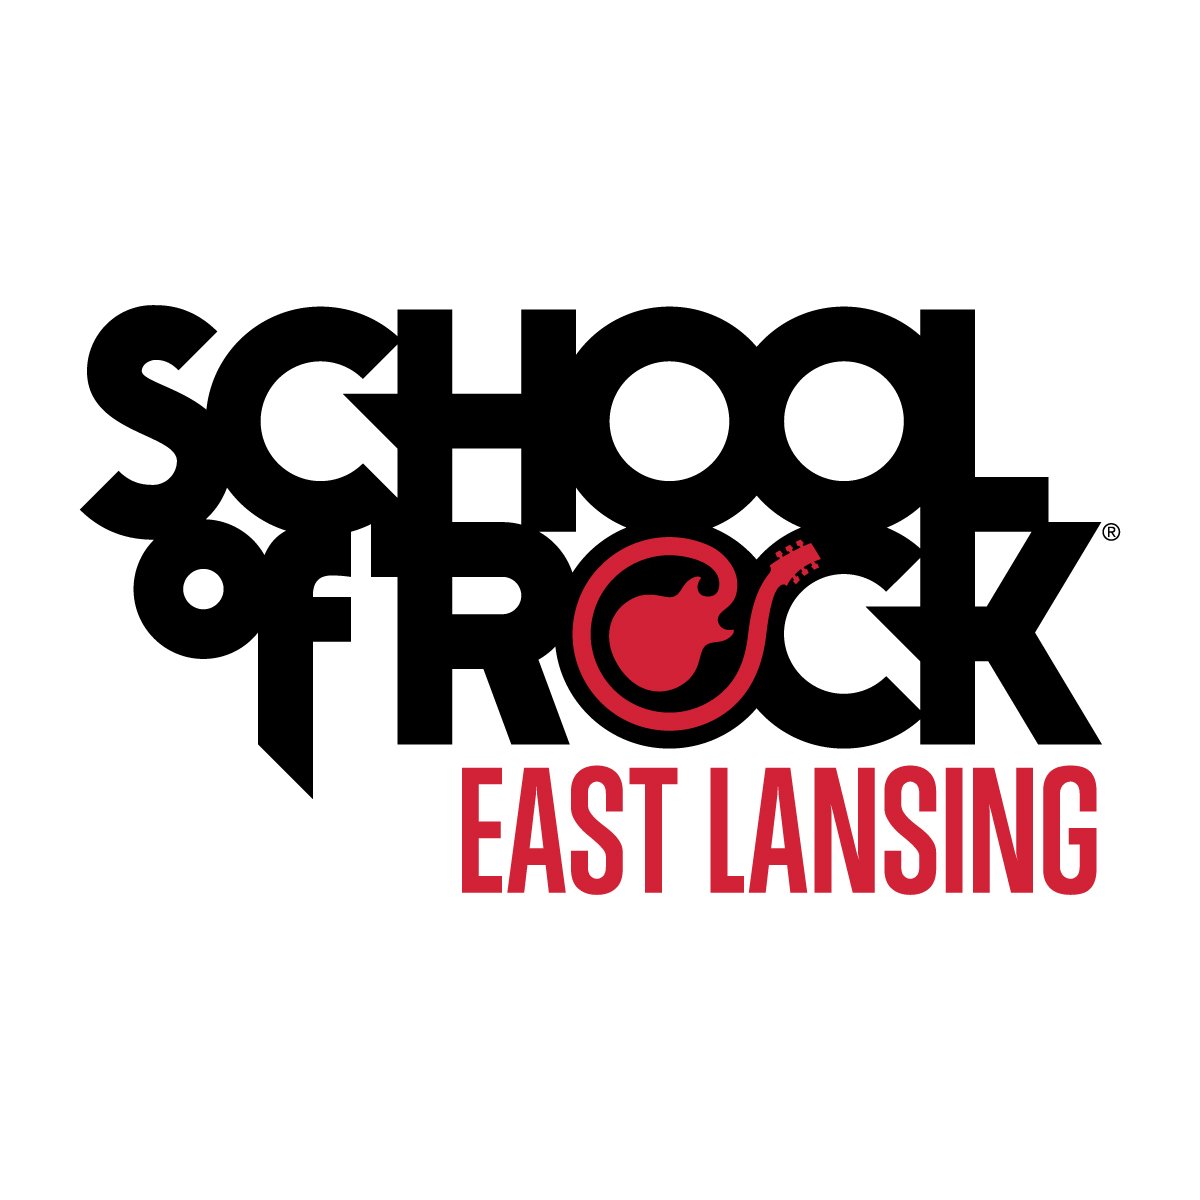 School of Rock East Lansing is a growing, passionate community dedicated to enriching lives through performance-based music education.